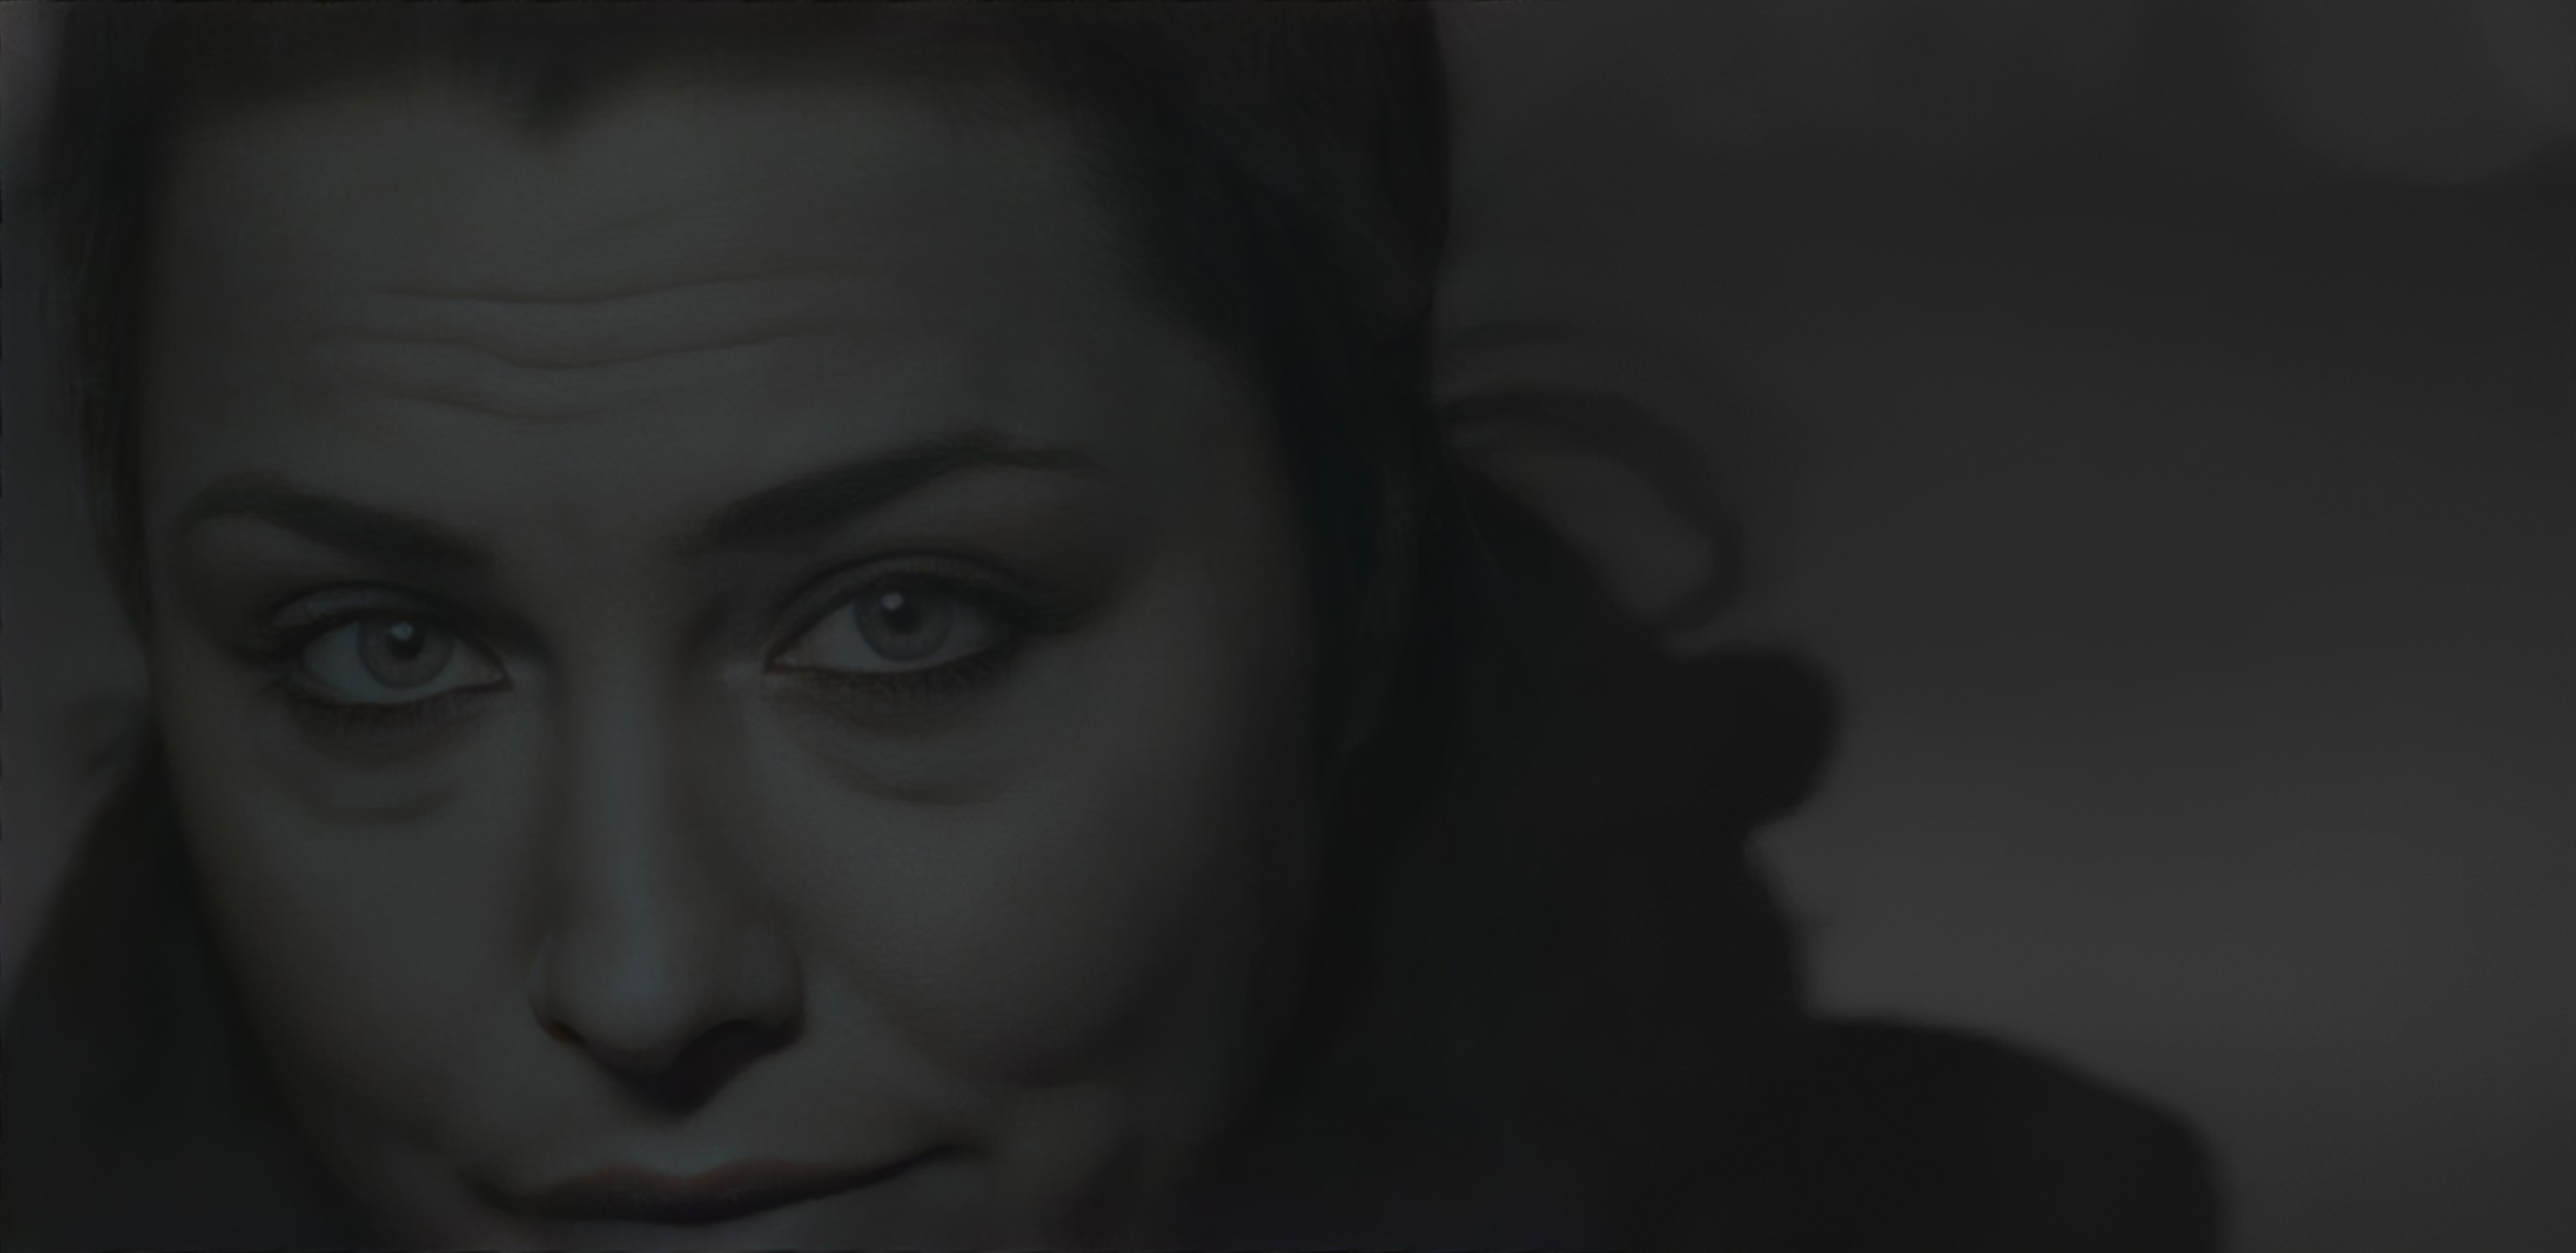 2960x1440
Keywords: amy lee;recover;baby did a bad bad thing;video